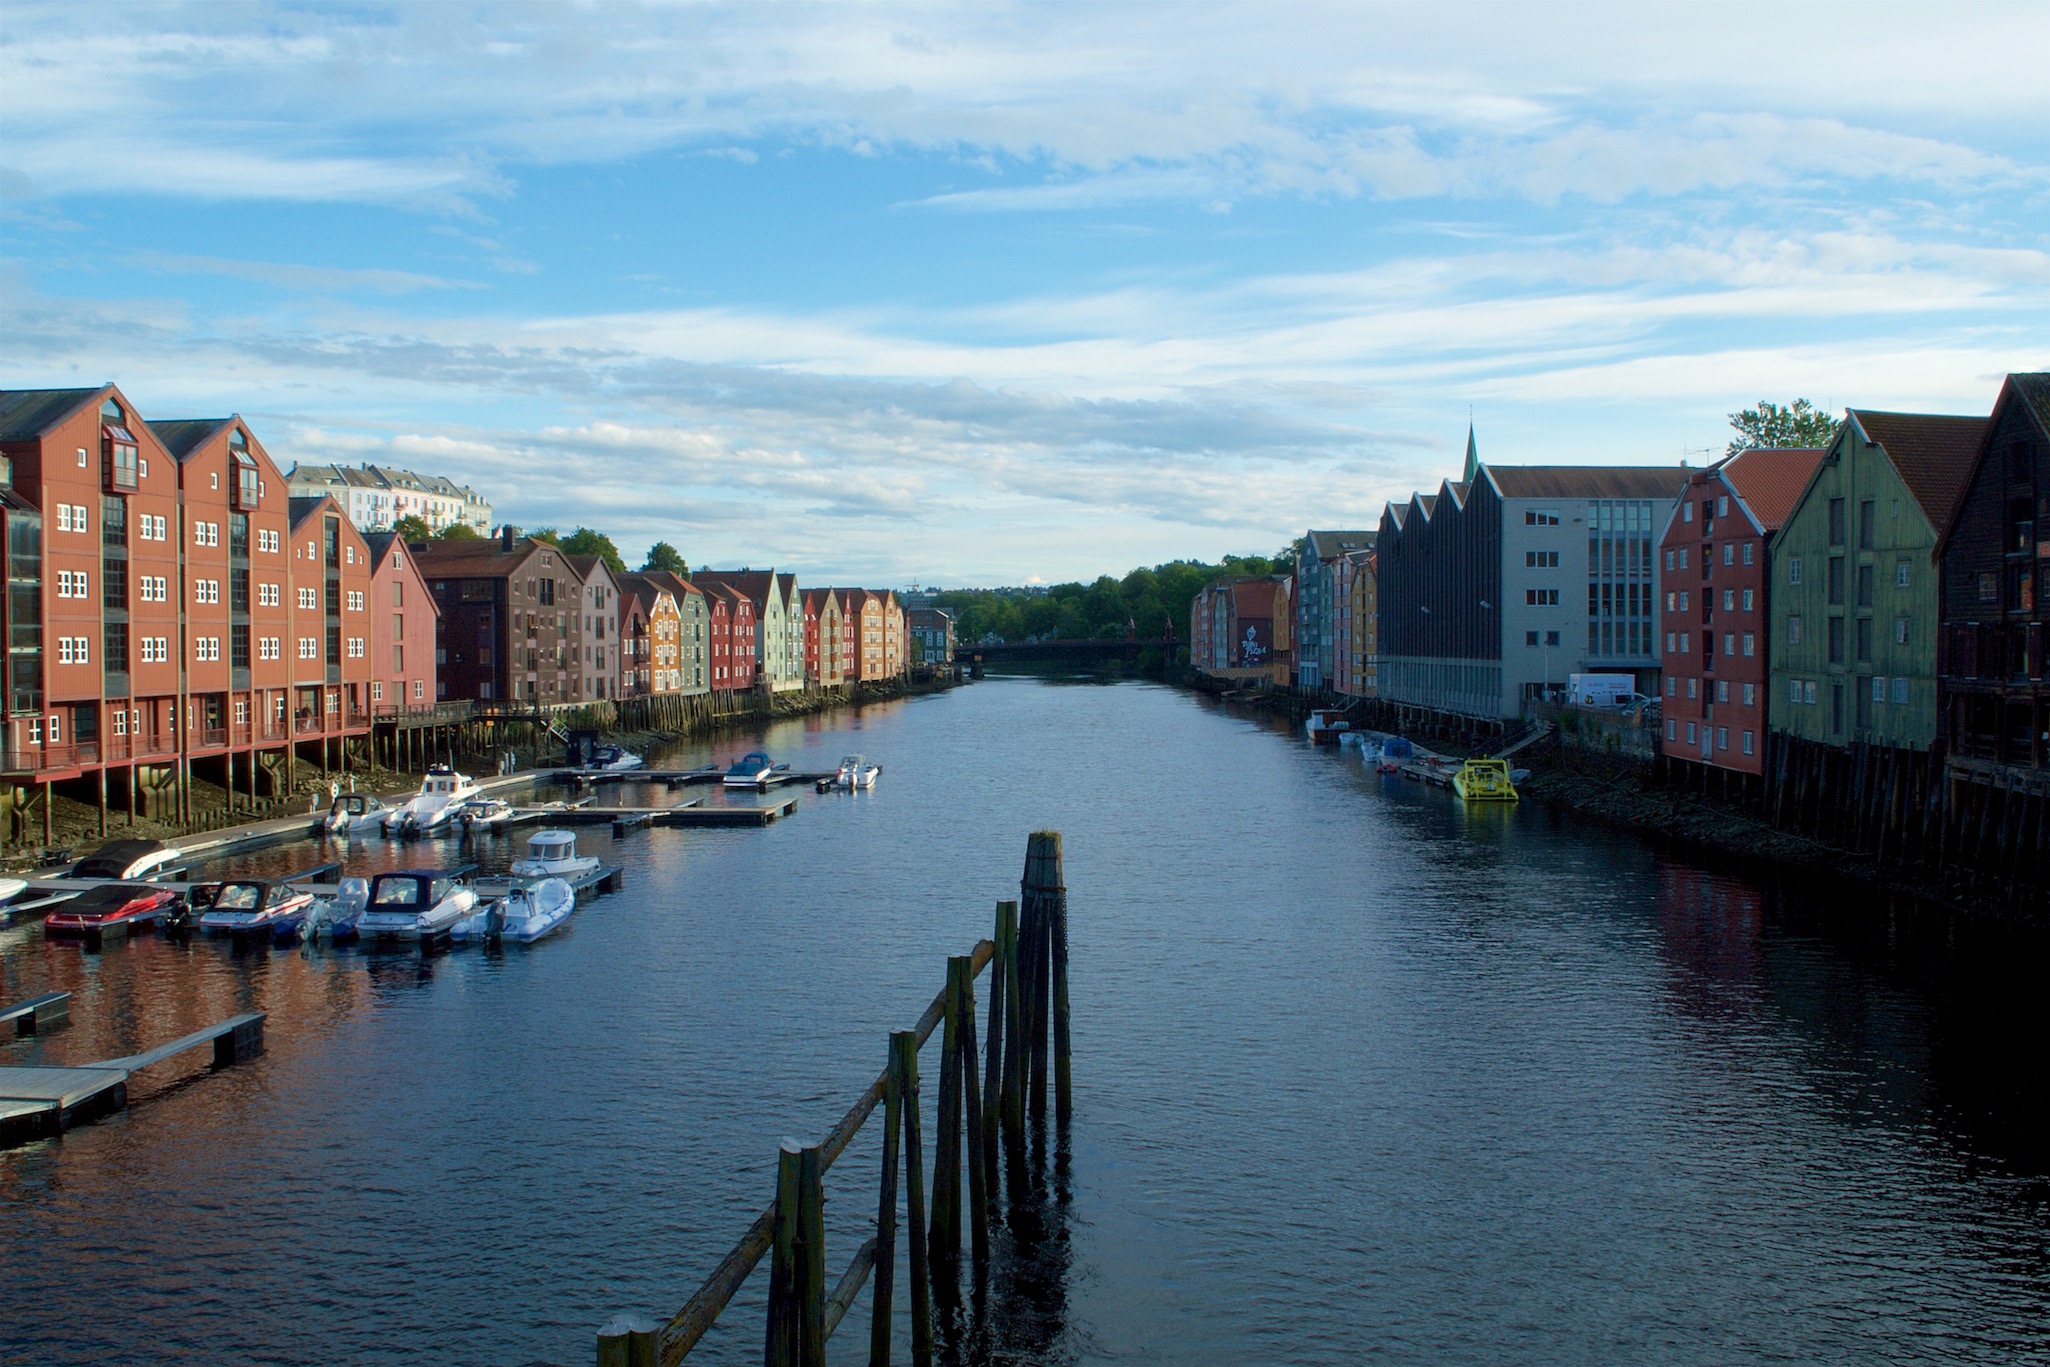 Colored wooden houses along the River Nidelven in Trondheim, Norway